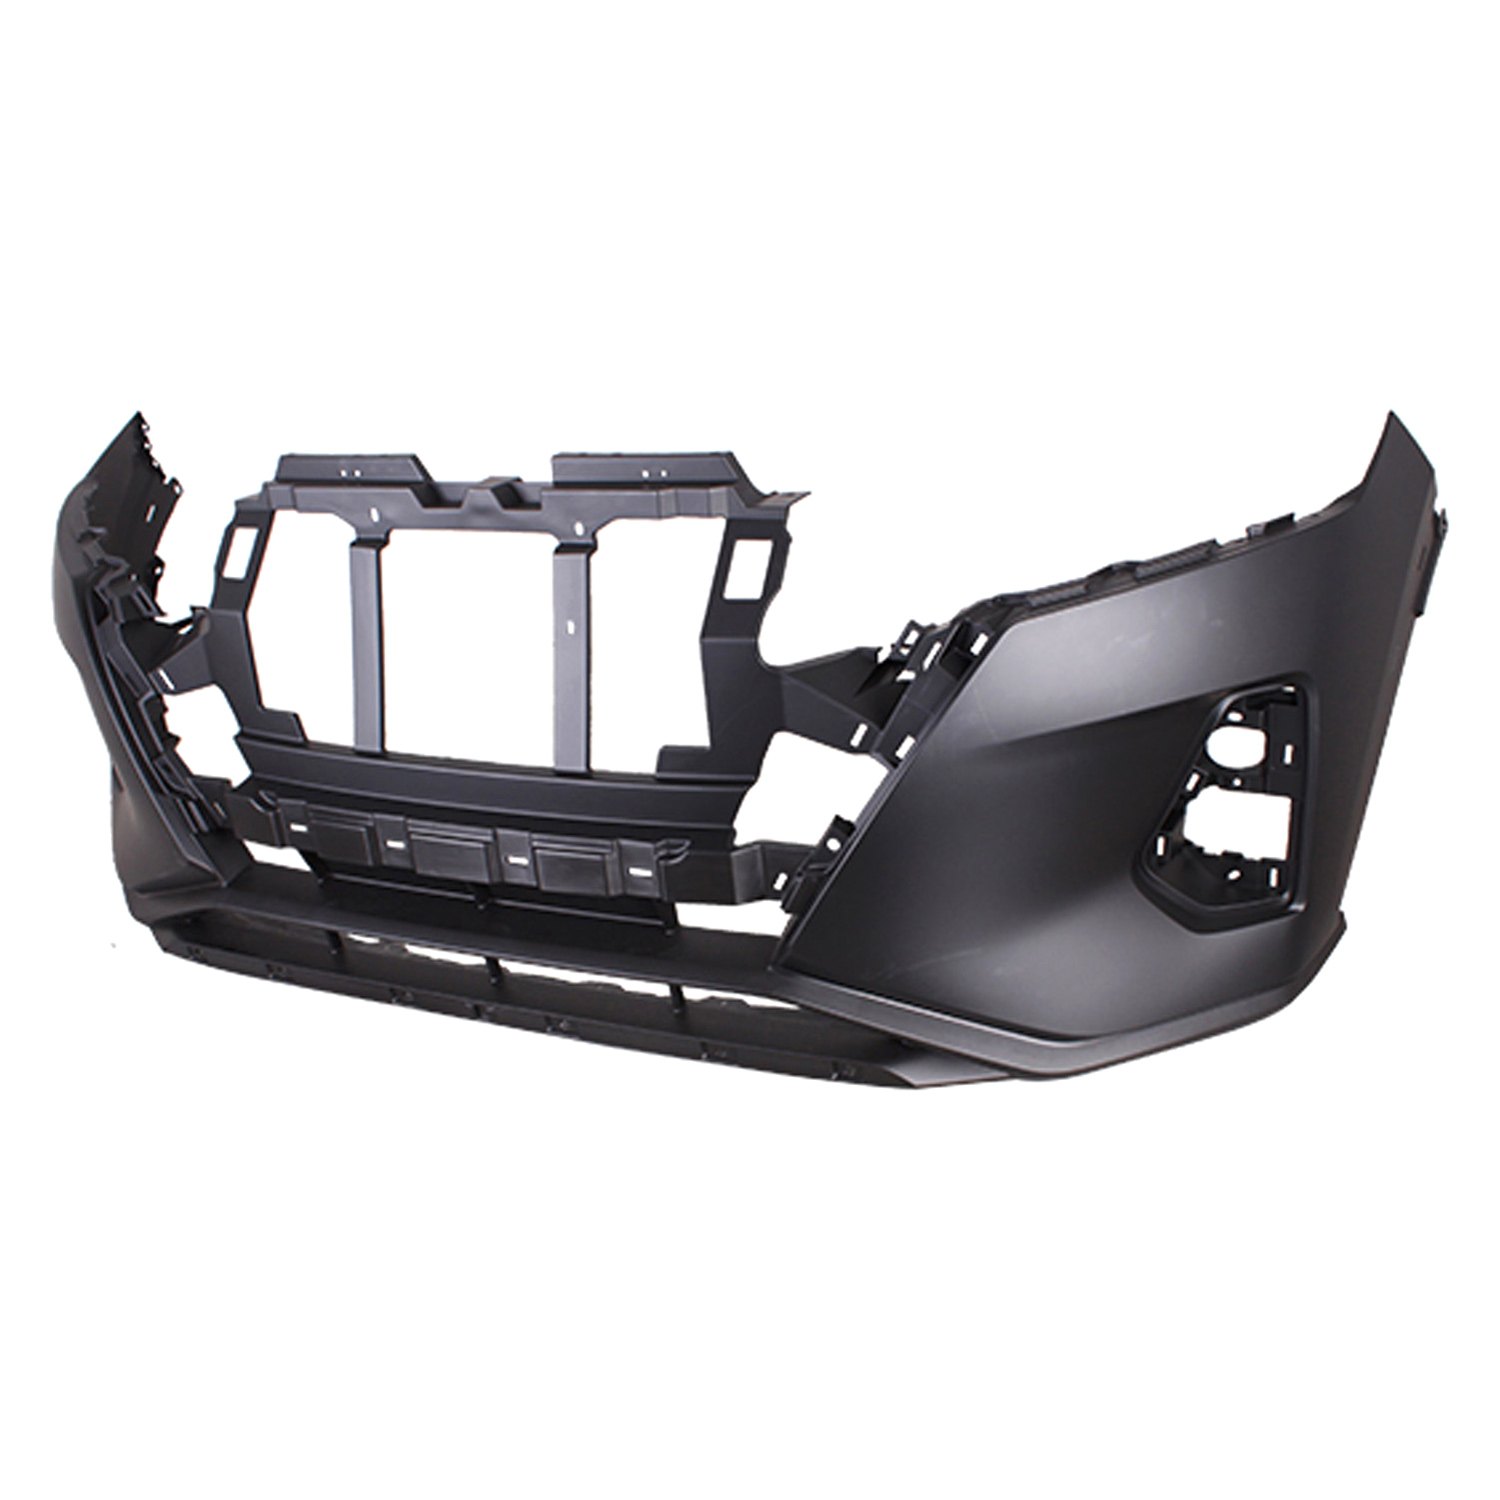 Replace® NI1000338 - Front Bumper Cover (Standard Line)